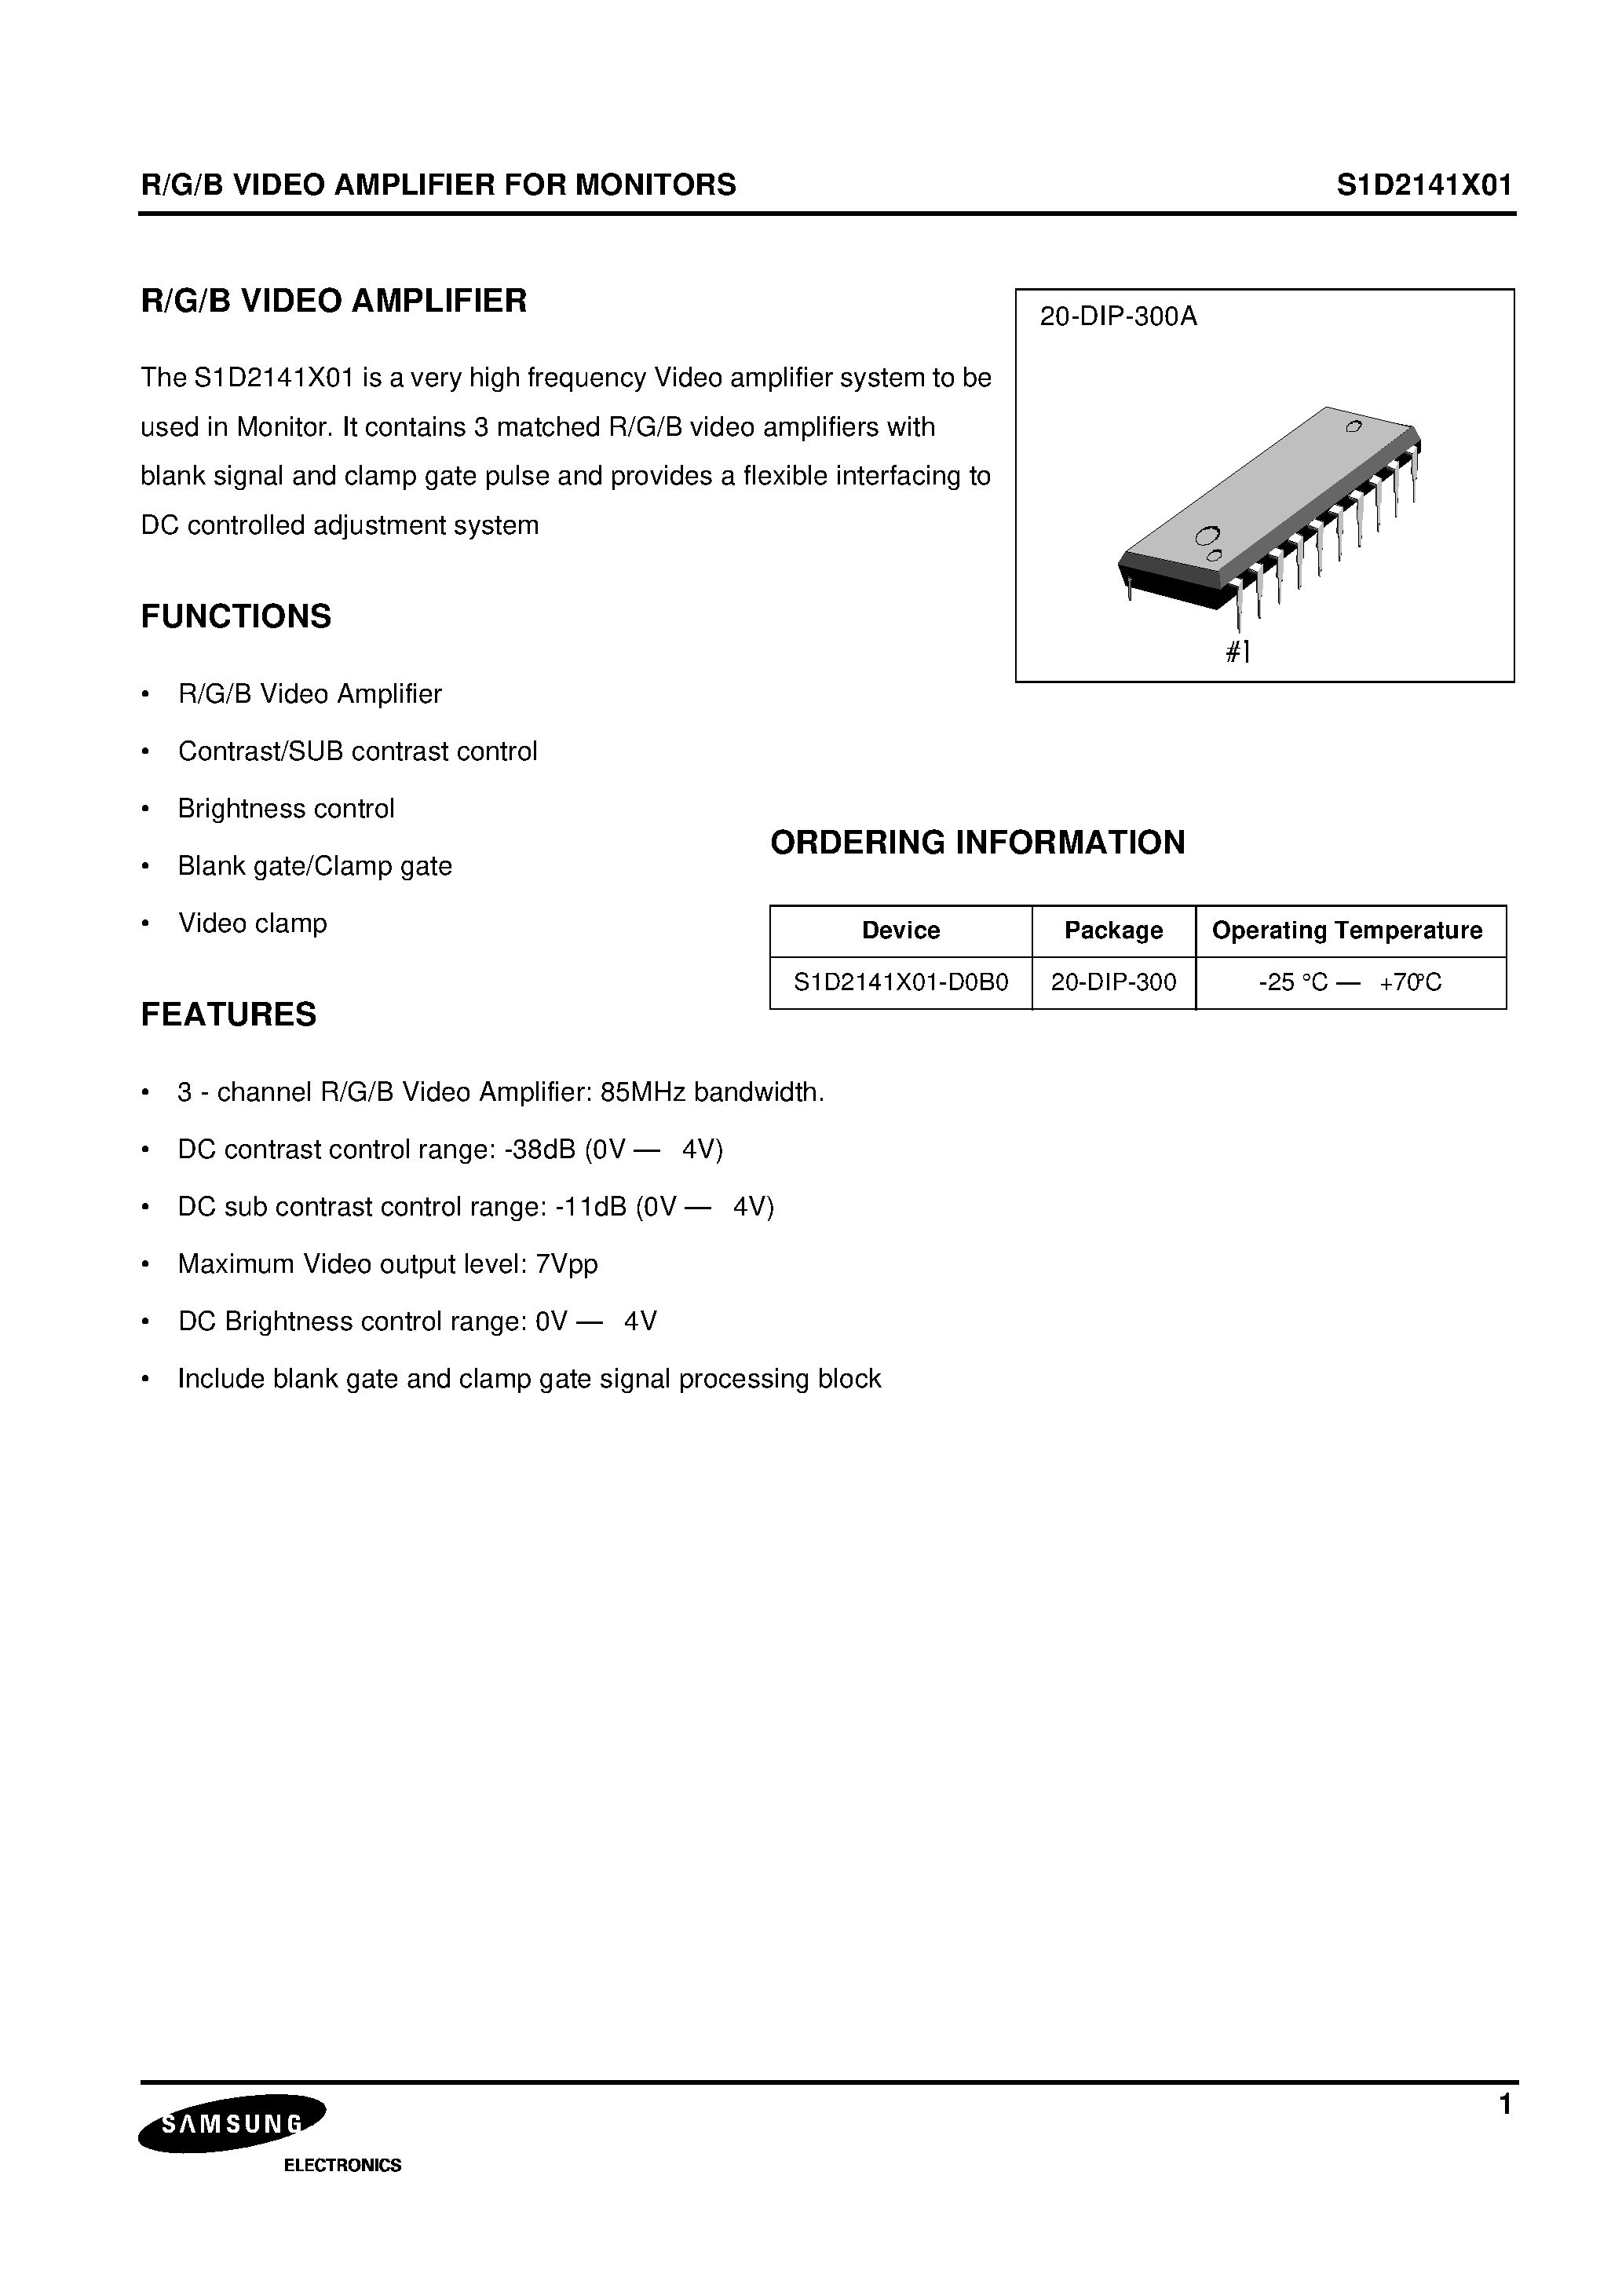 Datasheet S1D2141X01-D0 - R/G/B VIDEO AMPLIFIER FOR MONITORS page 1